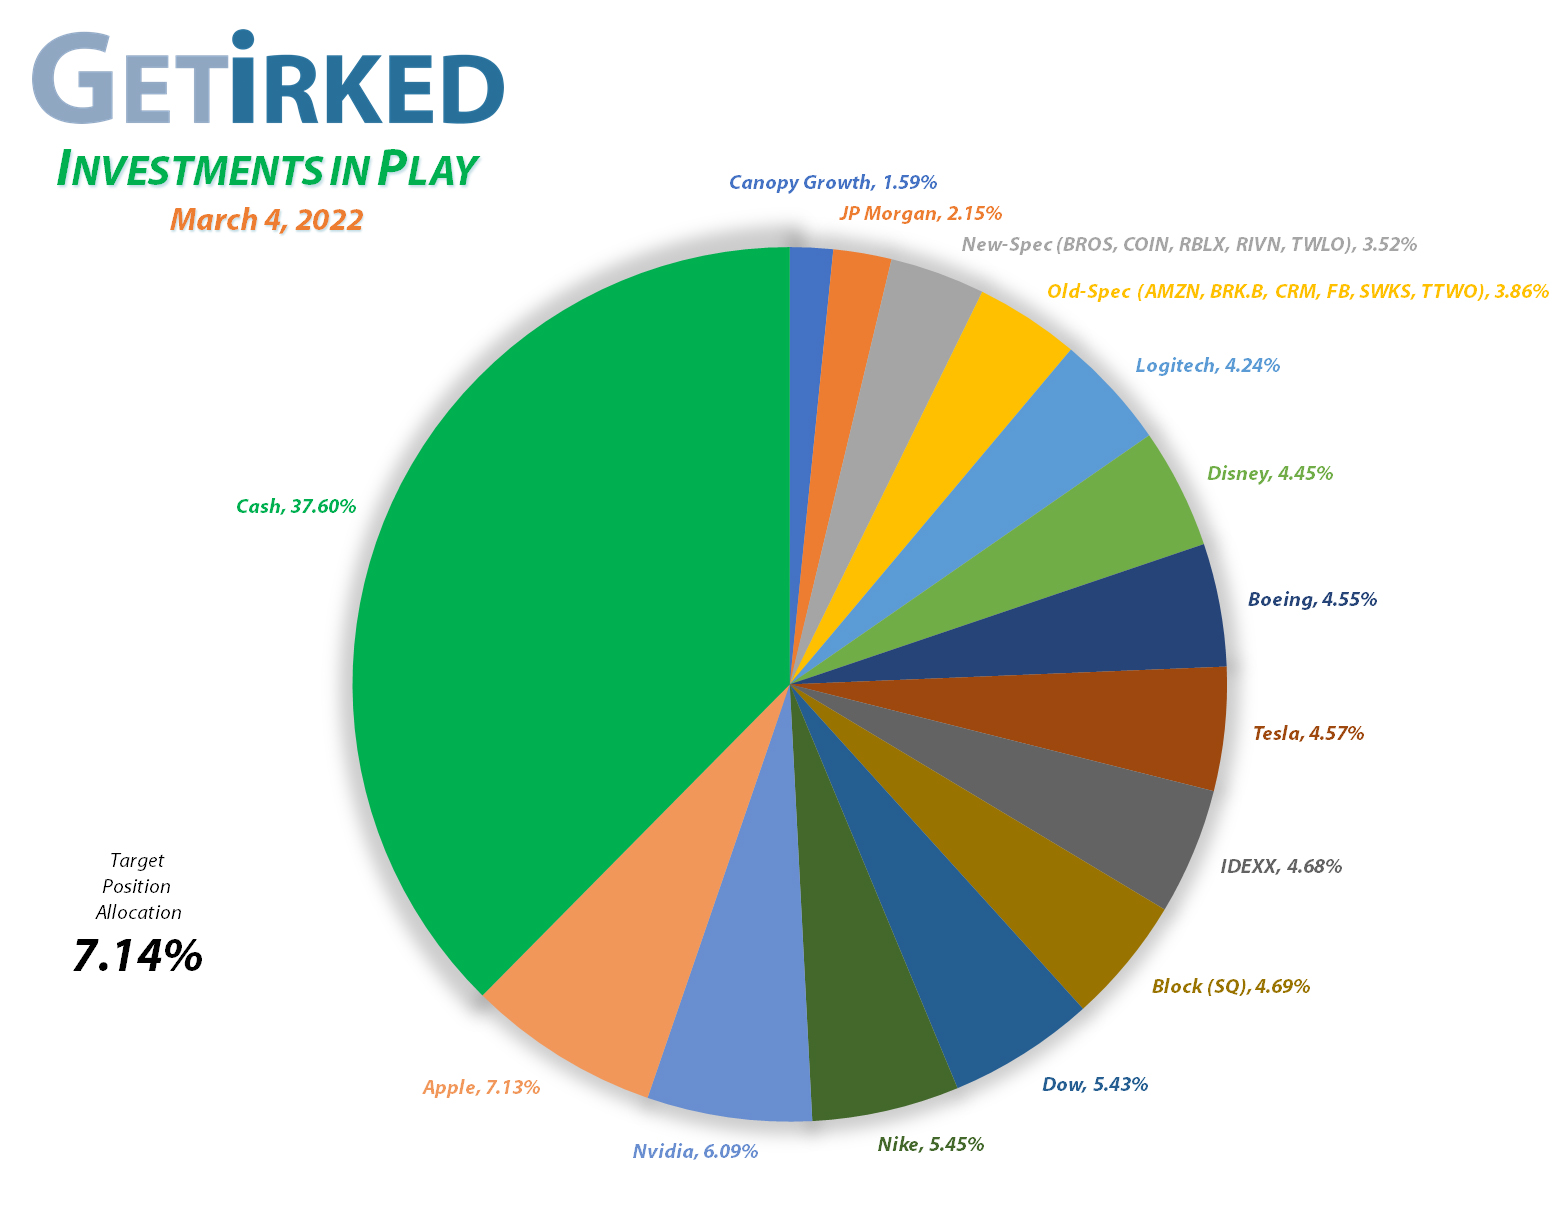 Get Irked - Investments in Play - Current Holdings - March 12, 2021et Irked's Pandemic Portfolio Holdings as of March 4, 2022